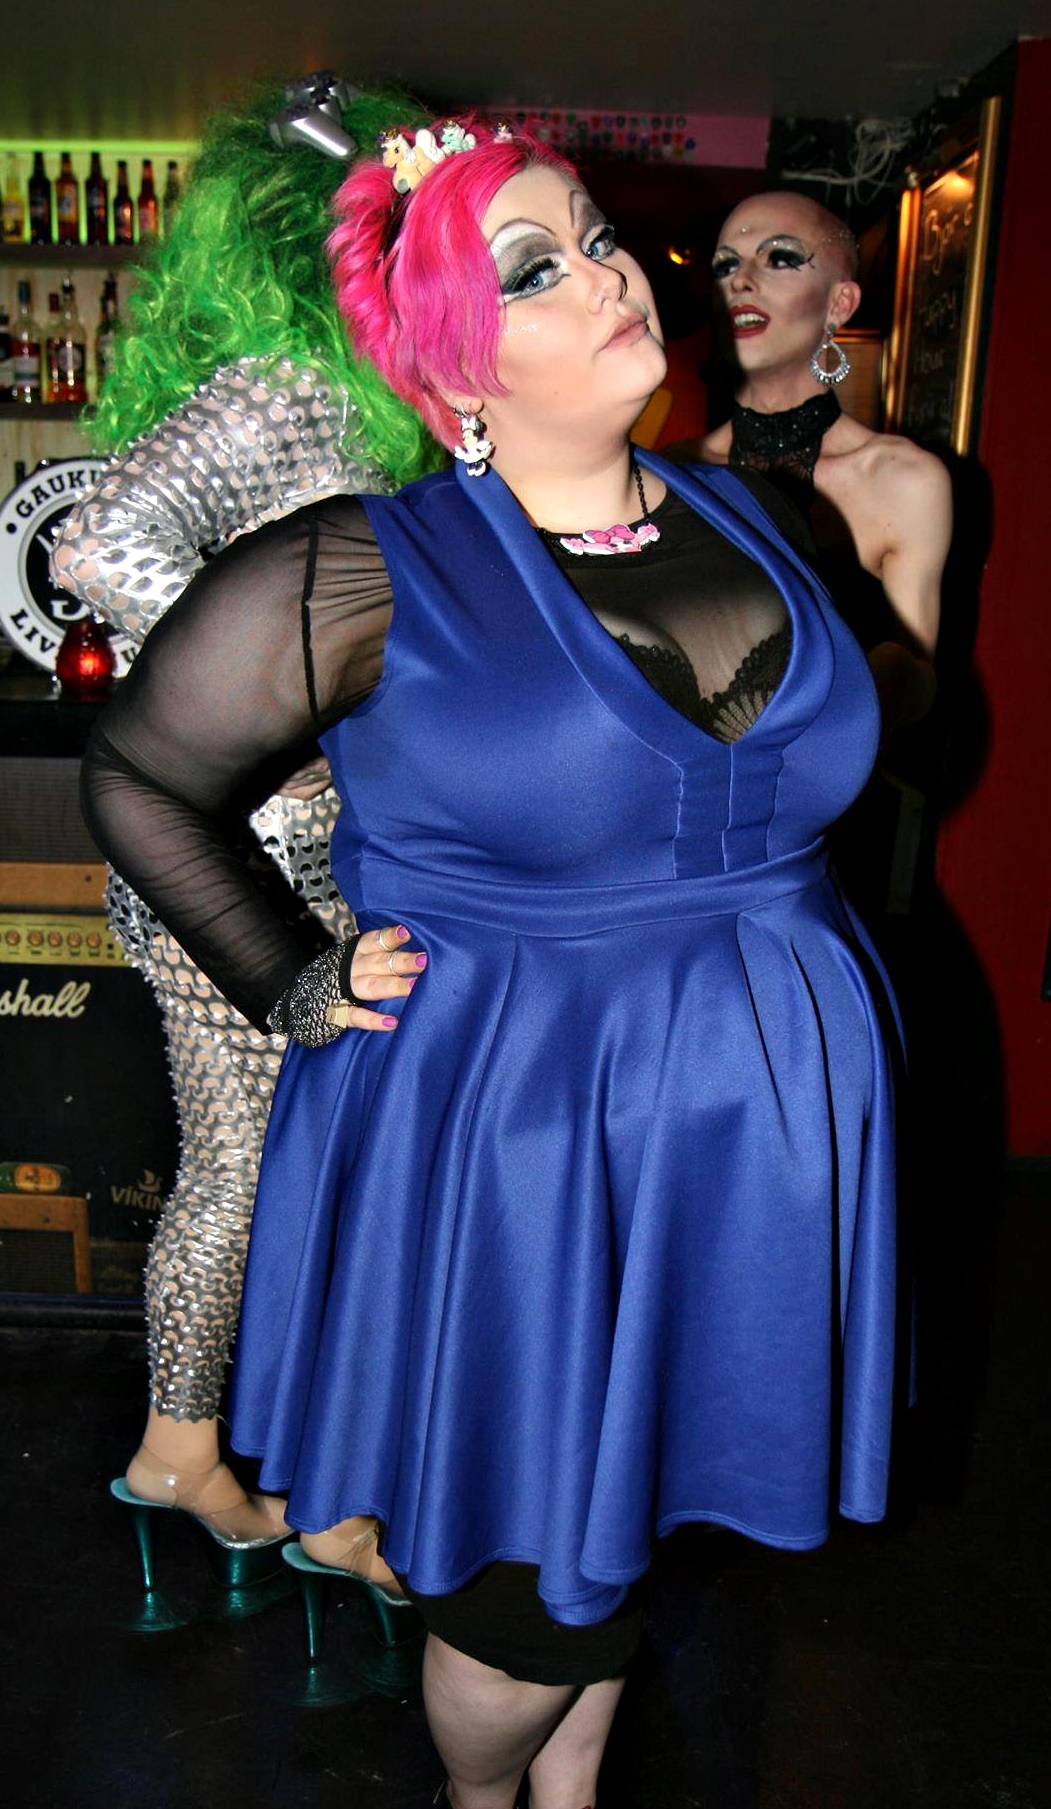 “Ursula is an exaggerated version of what I would have liked to be when I was younger,“ Ingunn says. “Cocky, a bit bitchy with huge amount of self confidence. She is very exaggerated, flaunting her breasts and legs and going all out.“